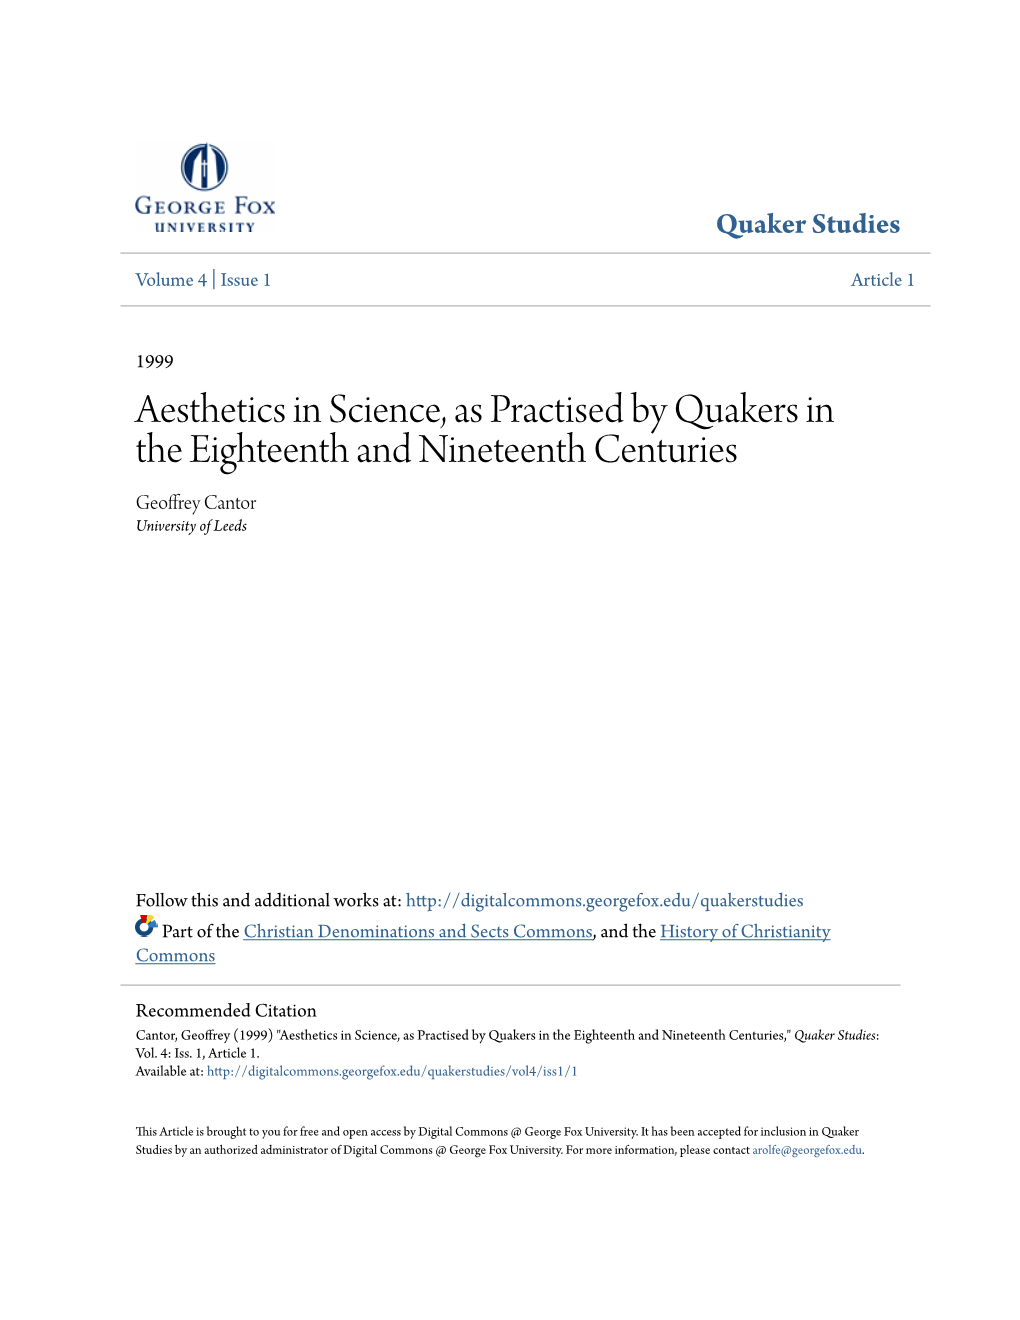 Aesthetics in Science, As Practised by Quakers in the Eighteenth and Nineteenth Centuries Geoffrey Cantor University of Leeds